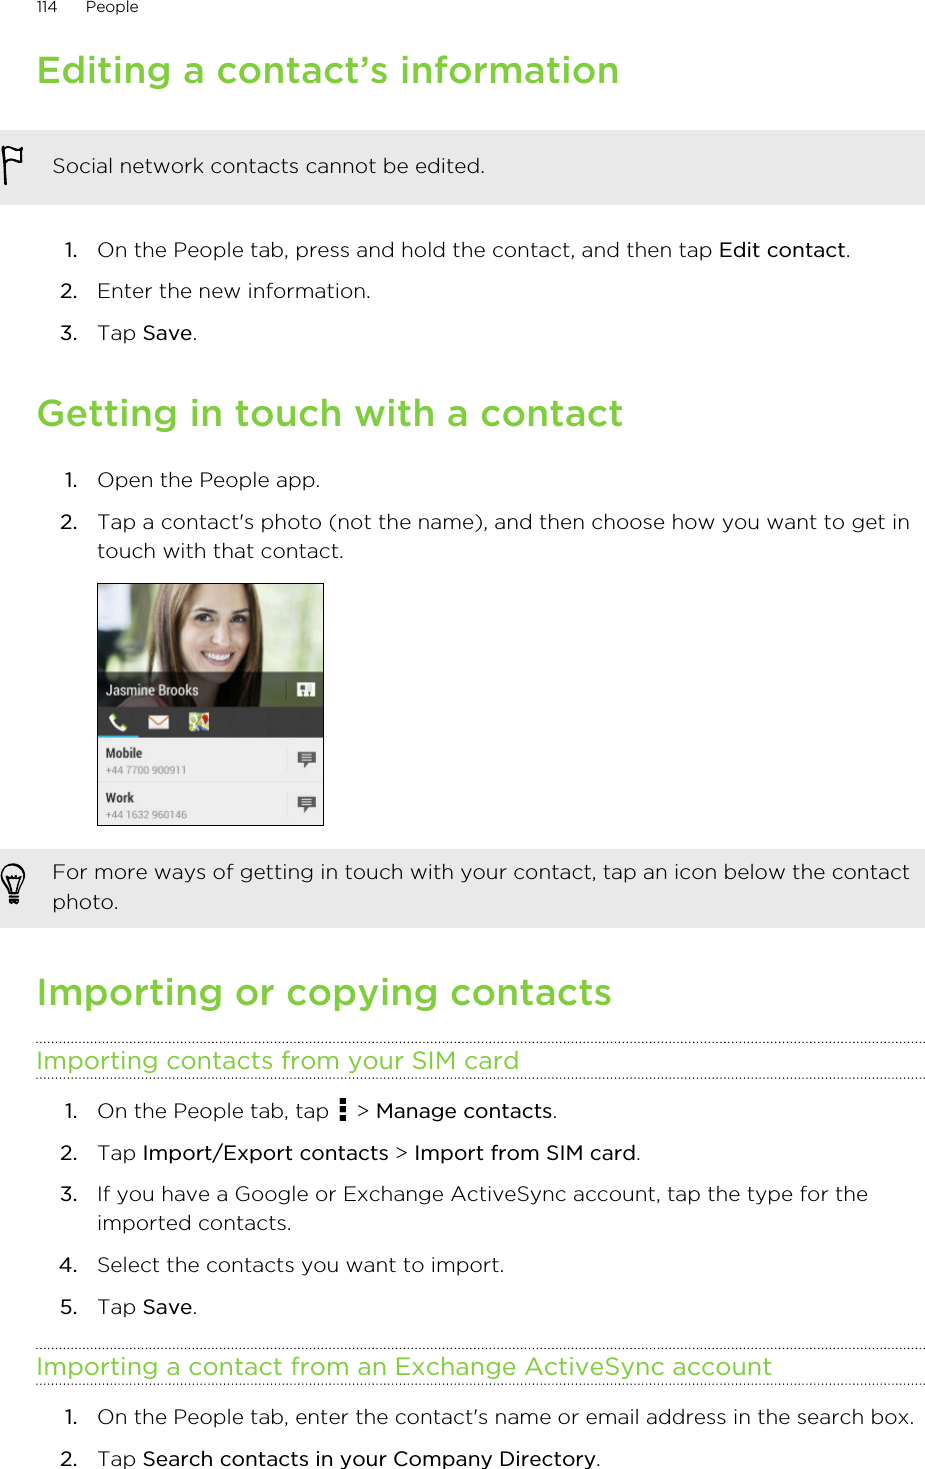 Editing a contact’s informationSocial network contacts cannot be edited.1. On the People tab, press and hold the contact, and then tap Edit contact.2. Enter the new information.3. Tap Save.Getting in touch with a contact1. Open the People app.2. Tap a contact&apos;s photo (not the name), and then choose how you want to get intouch with that contact. For more ways of getting in touch with your contact, tap an icon below the contactphoto.Importing or copying contactsImporting contacts from your SIM card1. On the People tab, tap   &gt; Manage contacts.2. Tap Import/Export contacts &gt; Import from SIM card.3. If you have a Google or Exchange ActiveSync account, tap the type for theimported contacts.4. Select the contacts you want to import.5. Tap Save.Importing a contact from an Exchange ActiveSync account1. On the People tab, enter the contact&apos;s name or email address in the search box.2. Tap Search contacts in your Company Directory.114 People